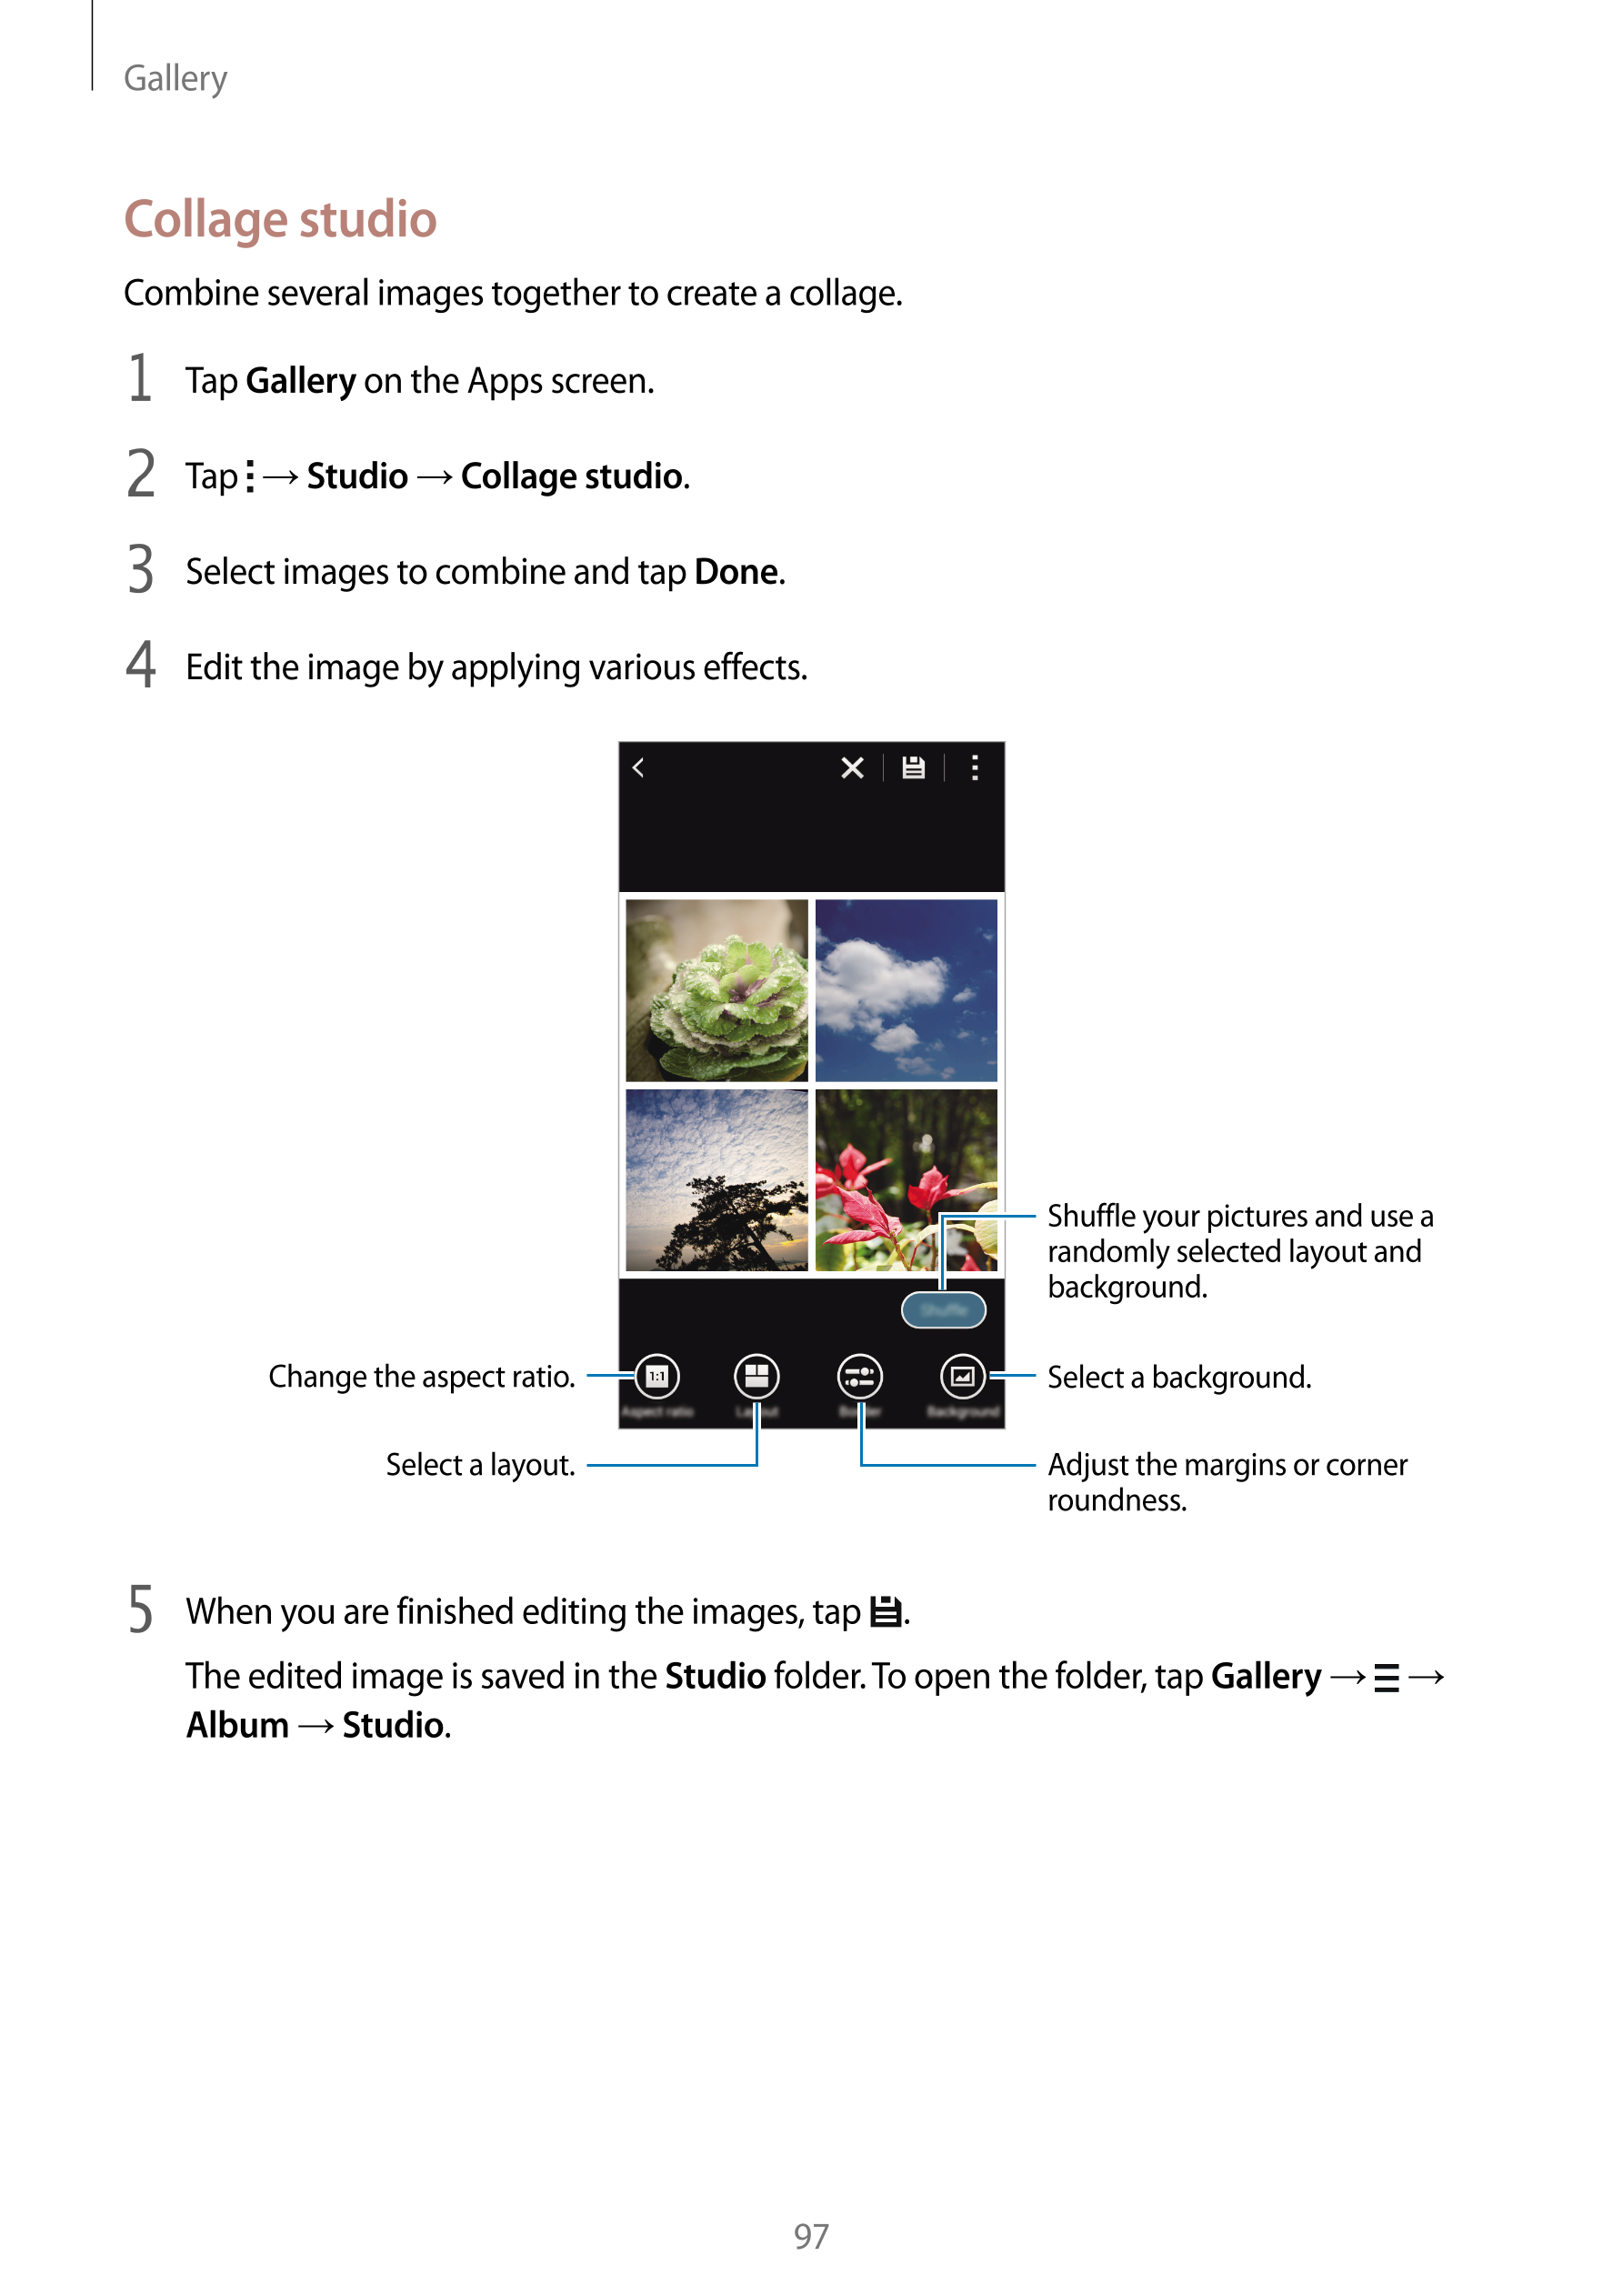 Gallery
Collage studio
Combine several images together to create a collage.
1  Tap  Gallery on the Apps screen.
2  Tap    →  Stu